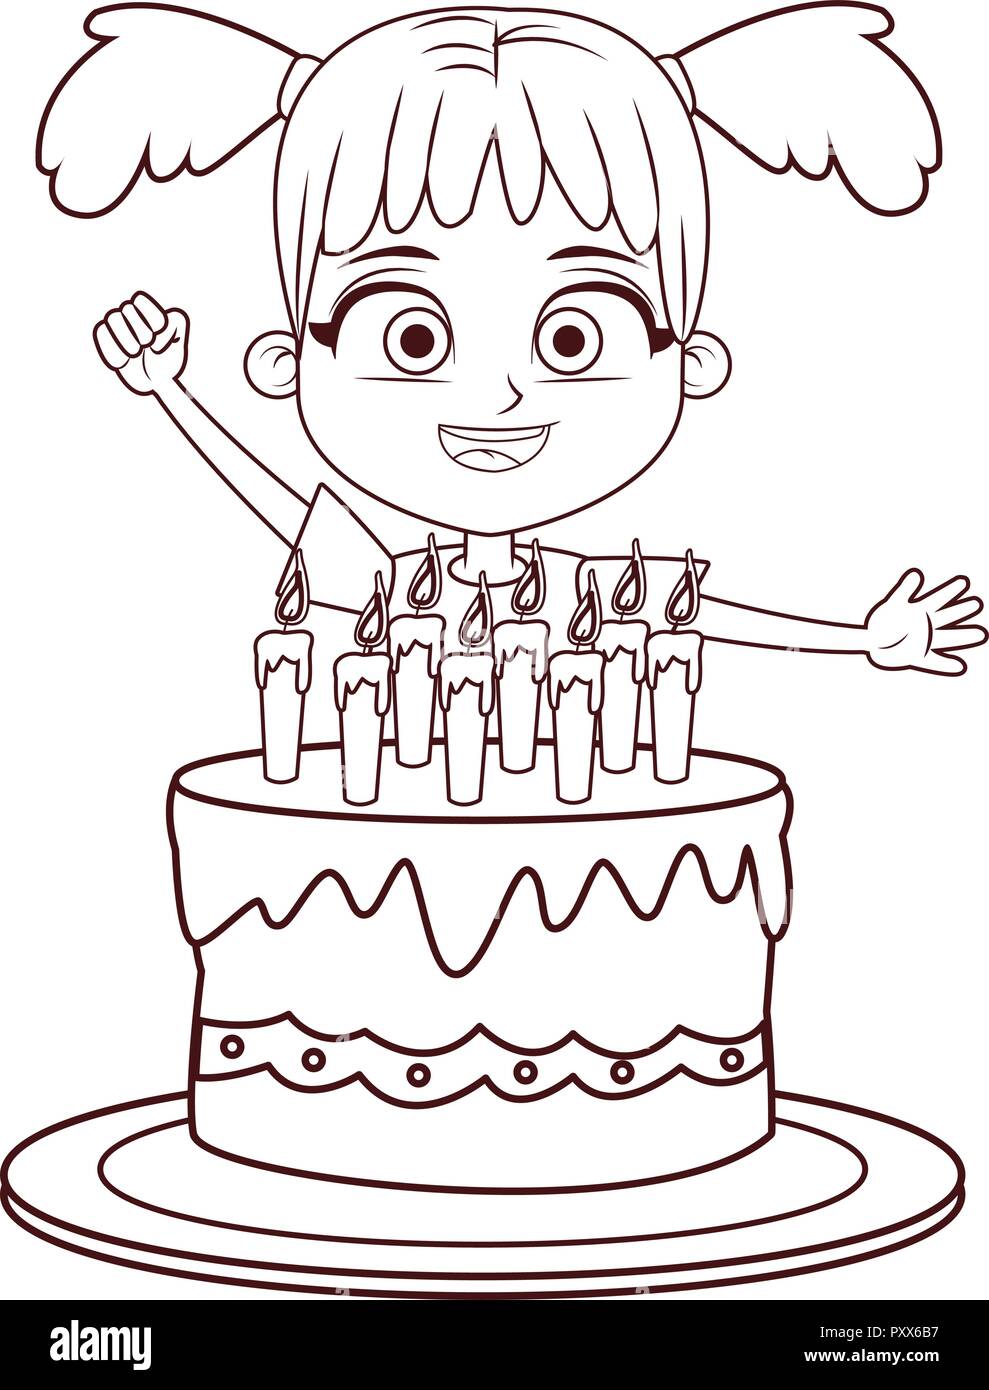 Drawing of birthday party for child Stock Photos - Page 1 : Masterfile